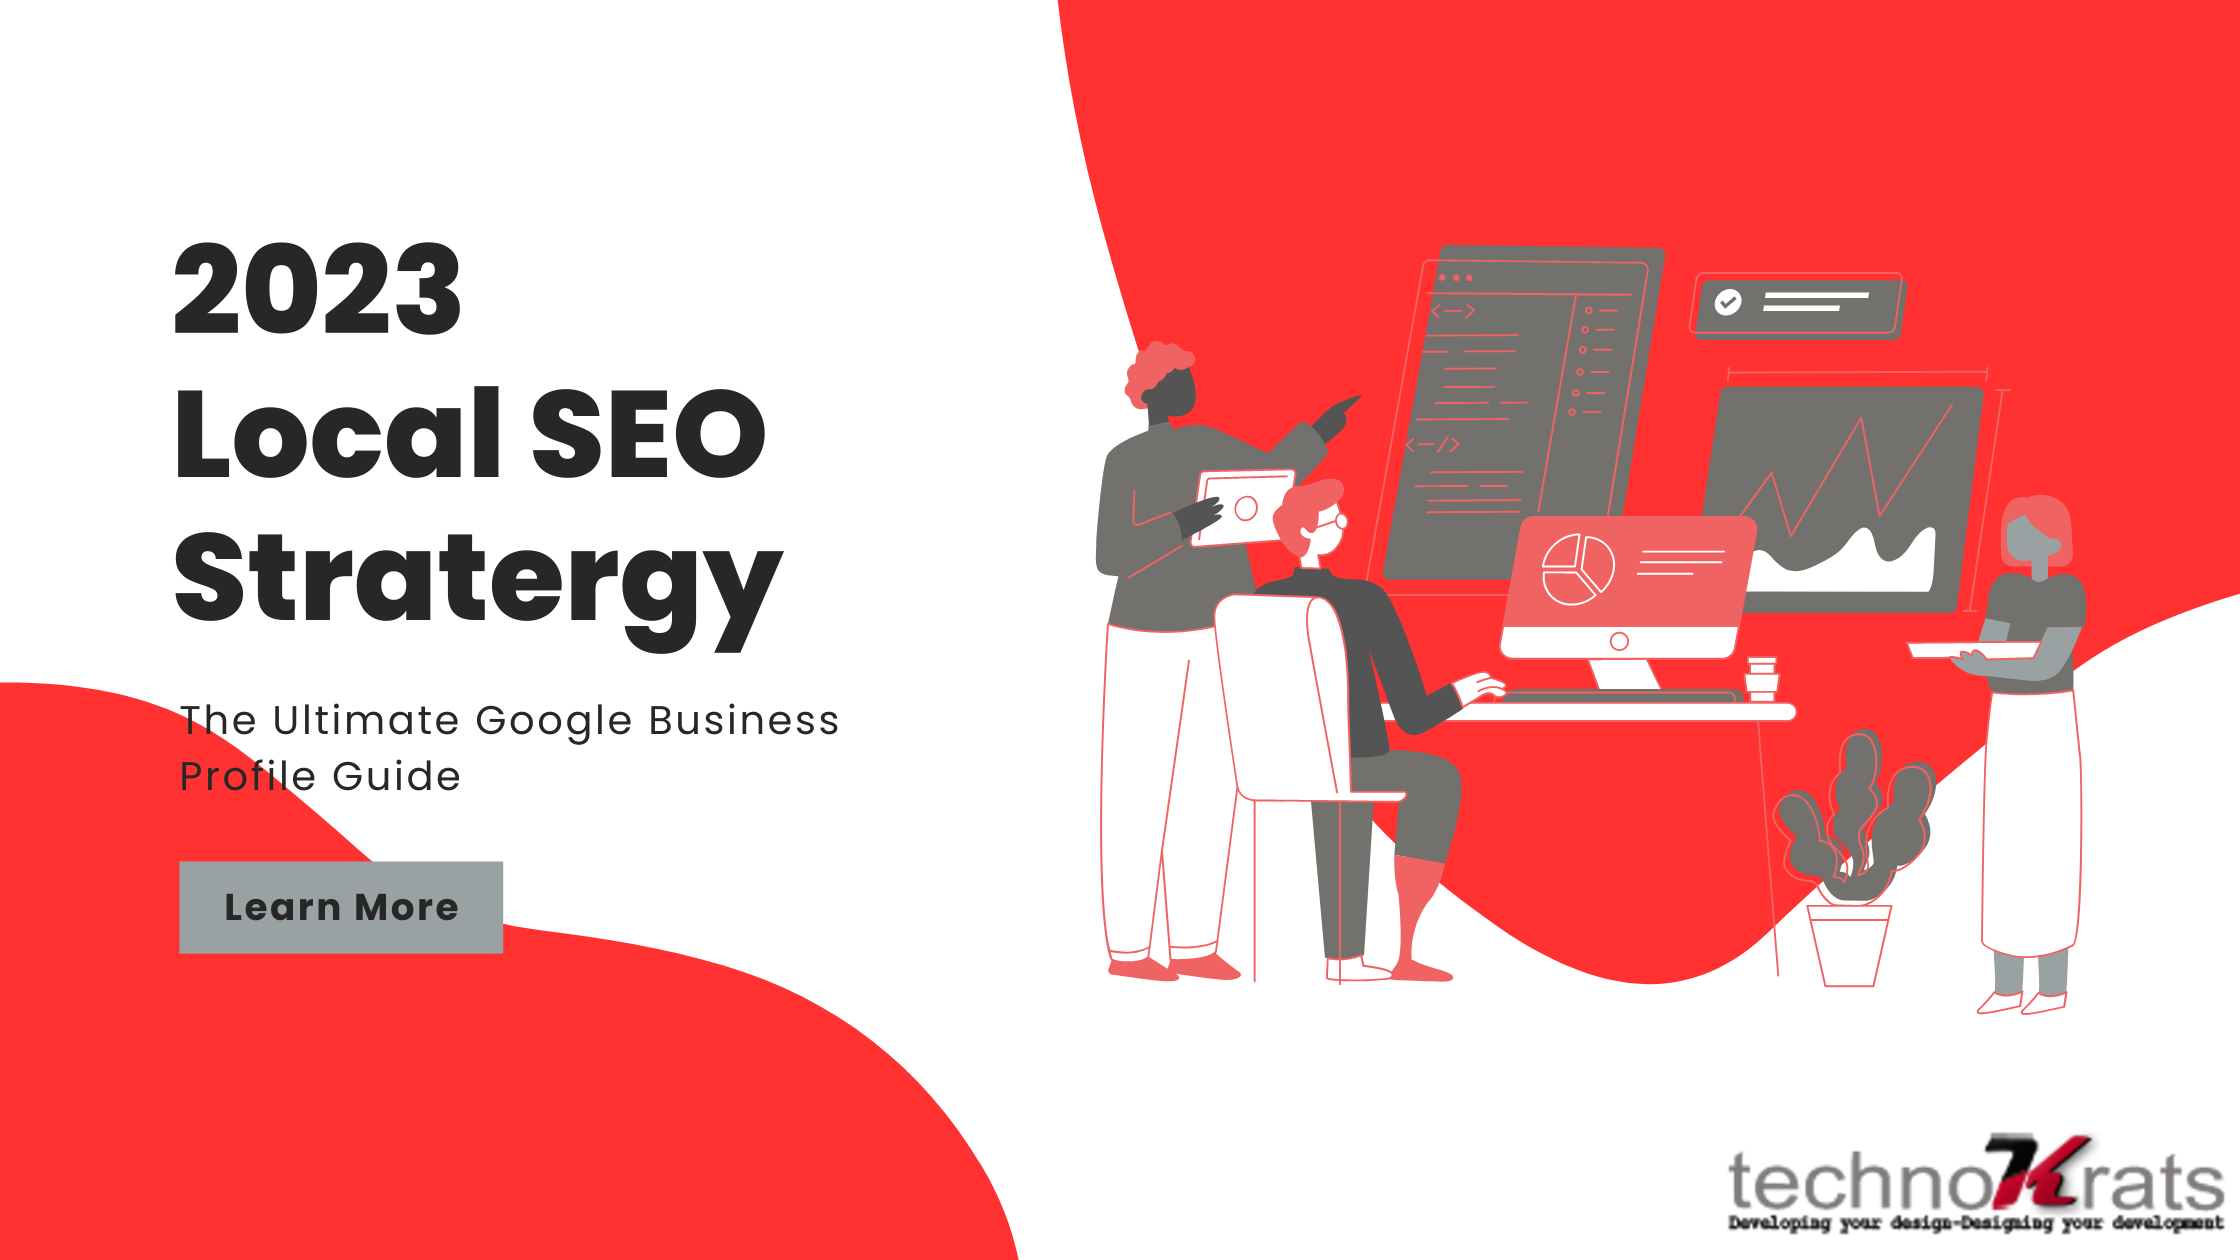 local SEO 2023 -the ultimate guide for GBP optimization